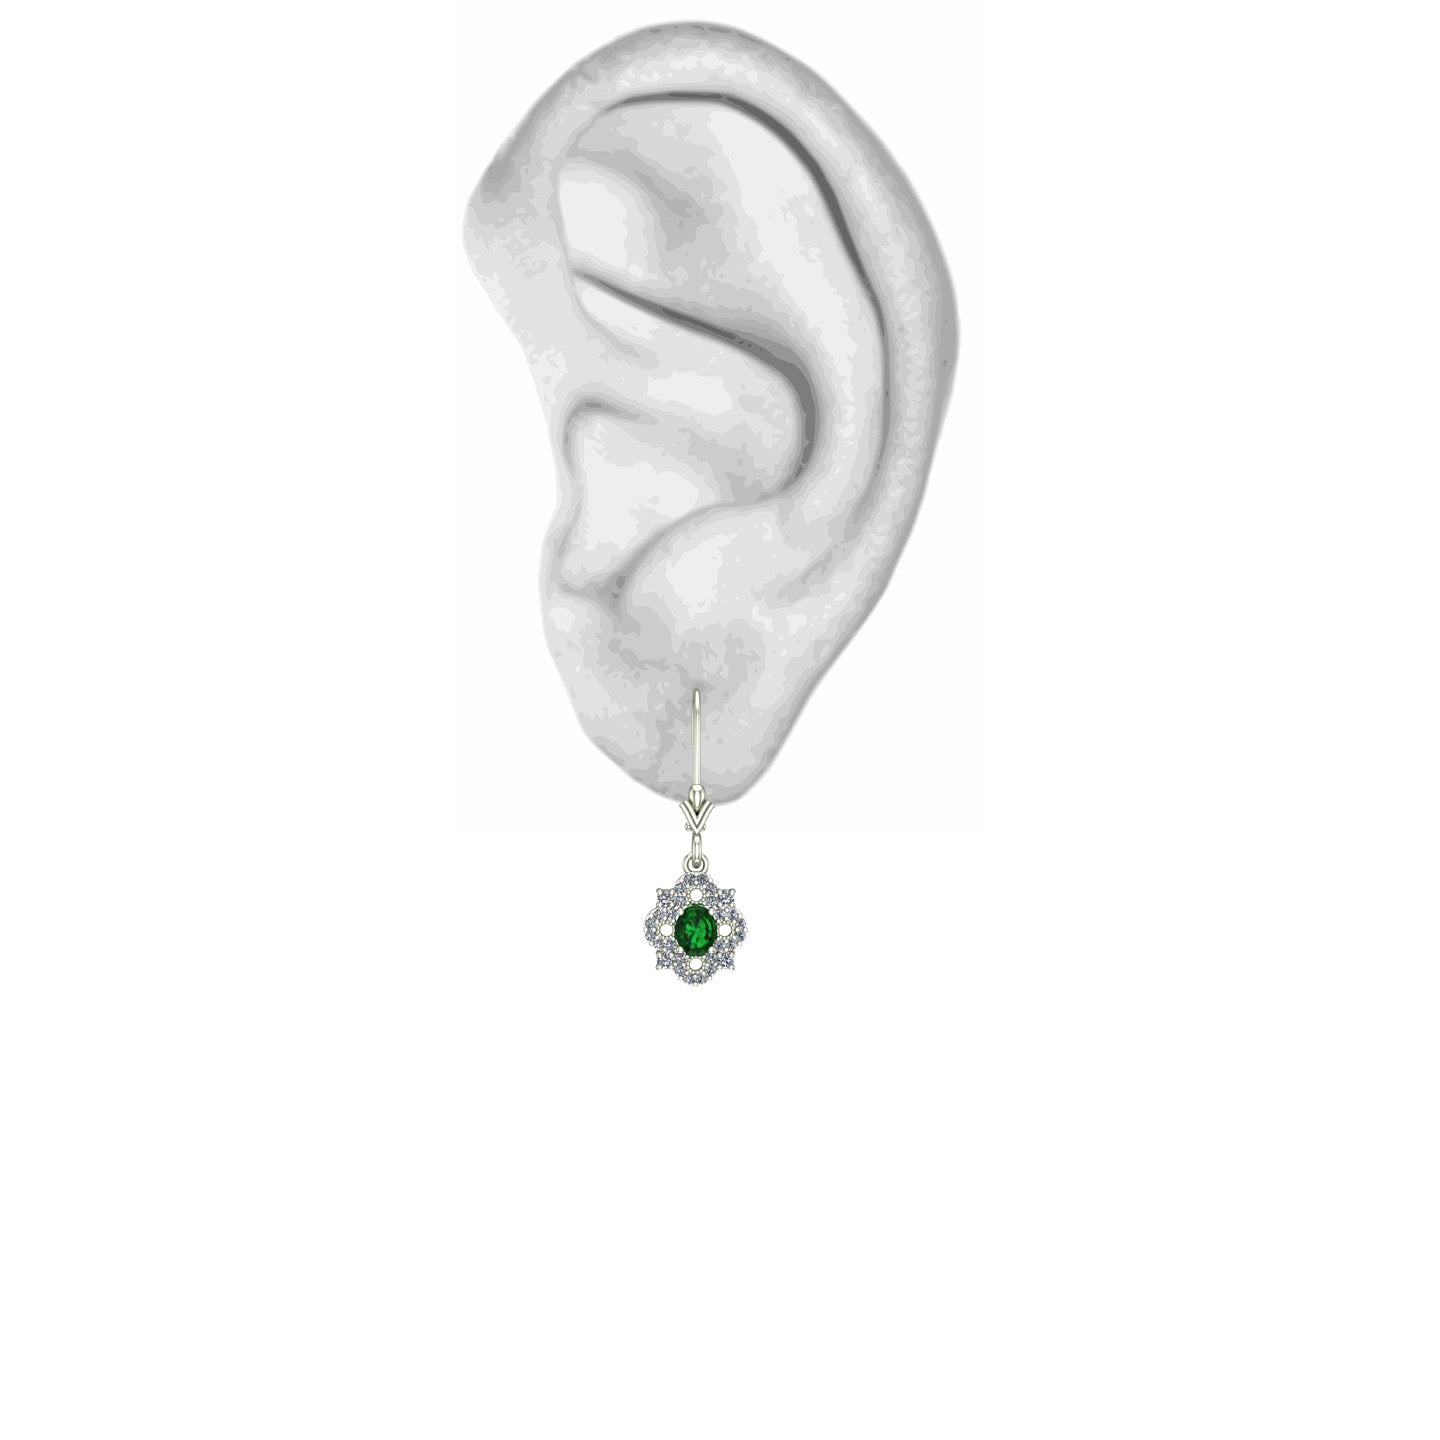 oval emerald and diamond dangle earrings in 14k white gold - Charles Babb Designs - on ear